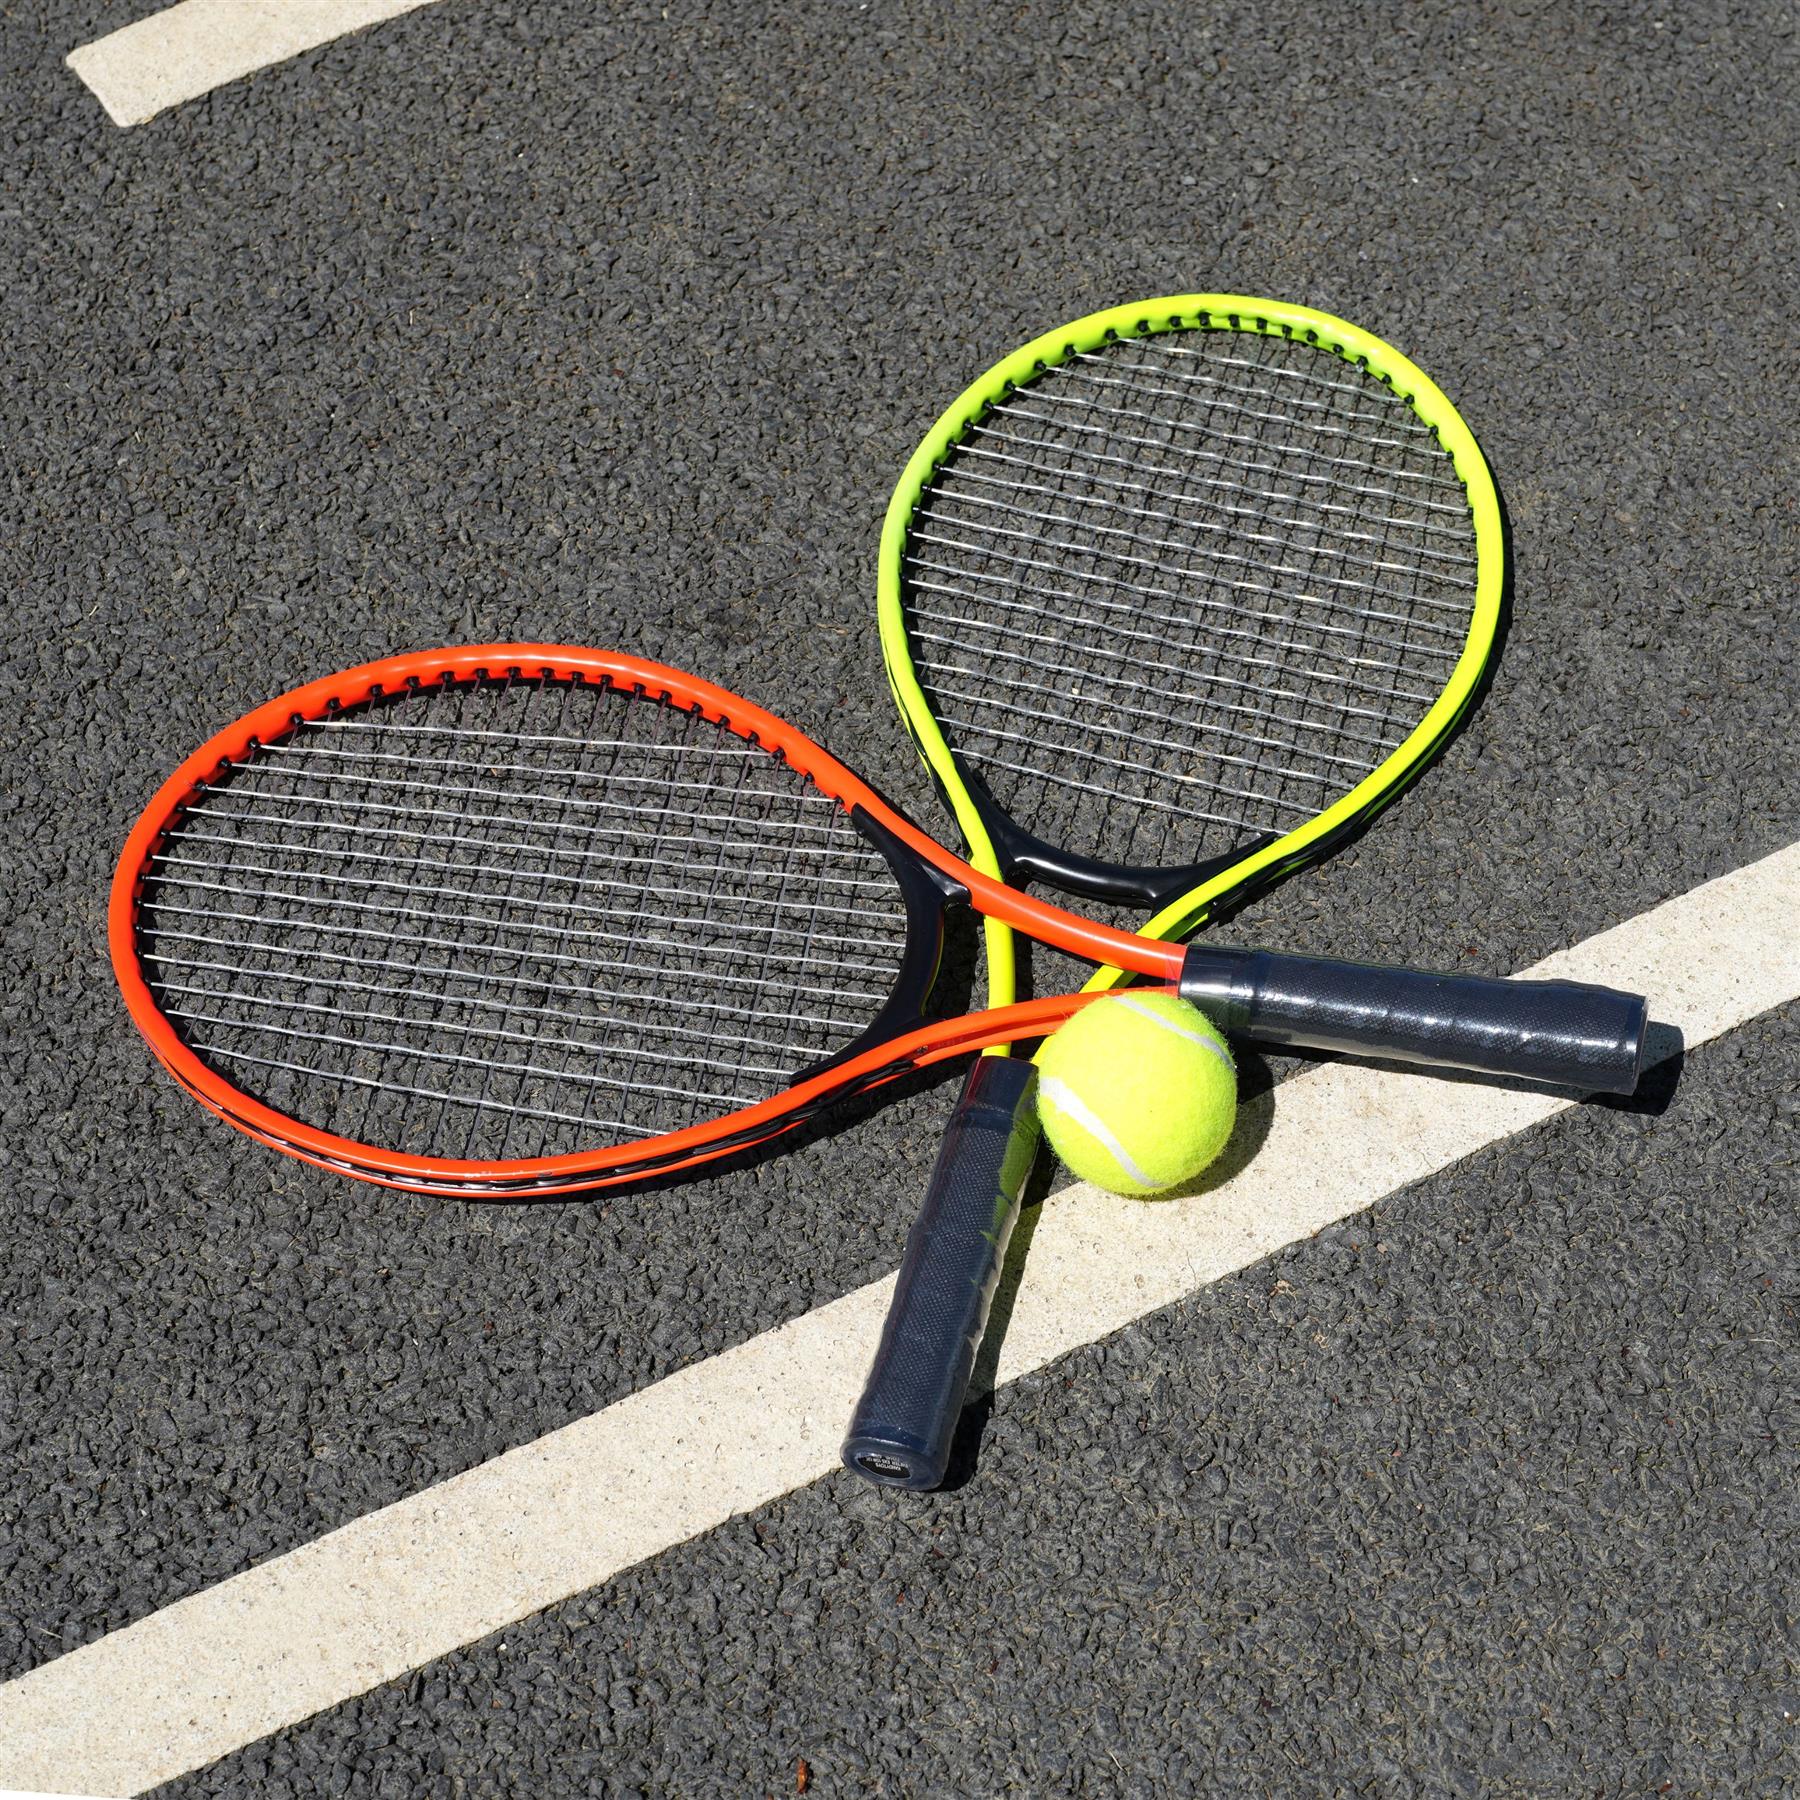 Metal Junior Tennis Set With 2 Racquets and Ball by The Magic Toy Shop - UKBuyZone